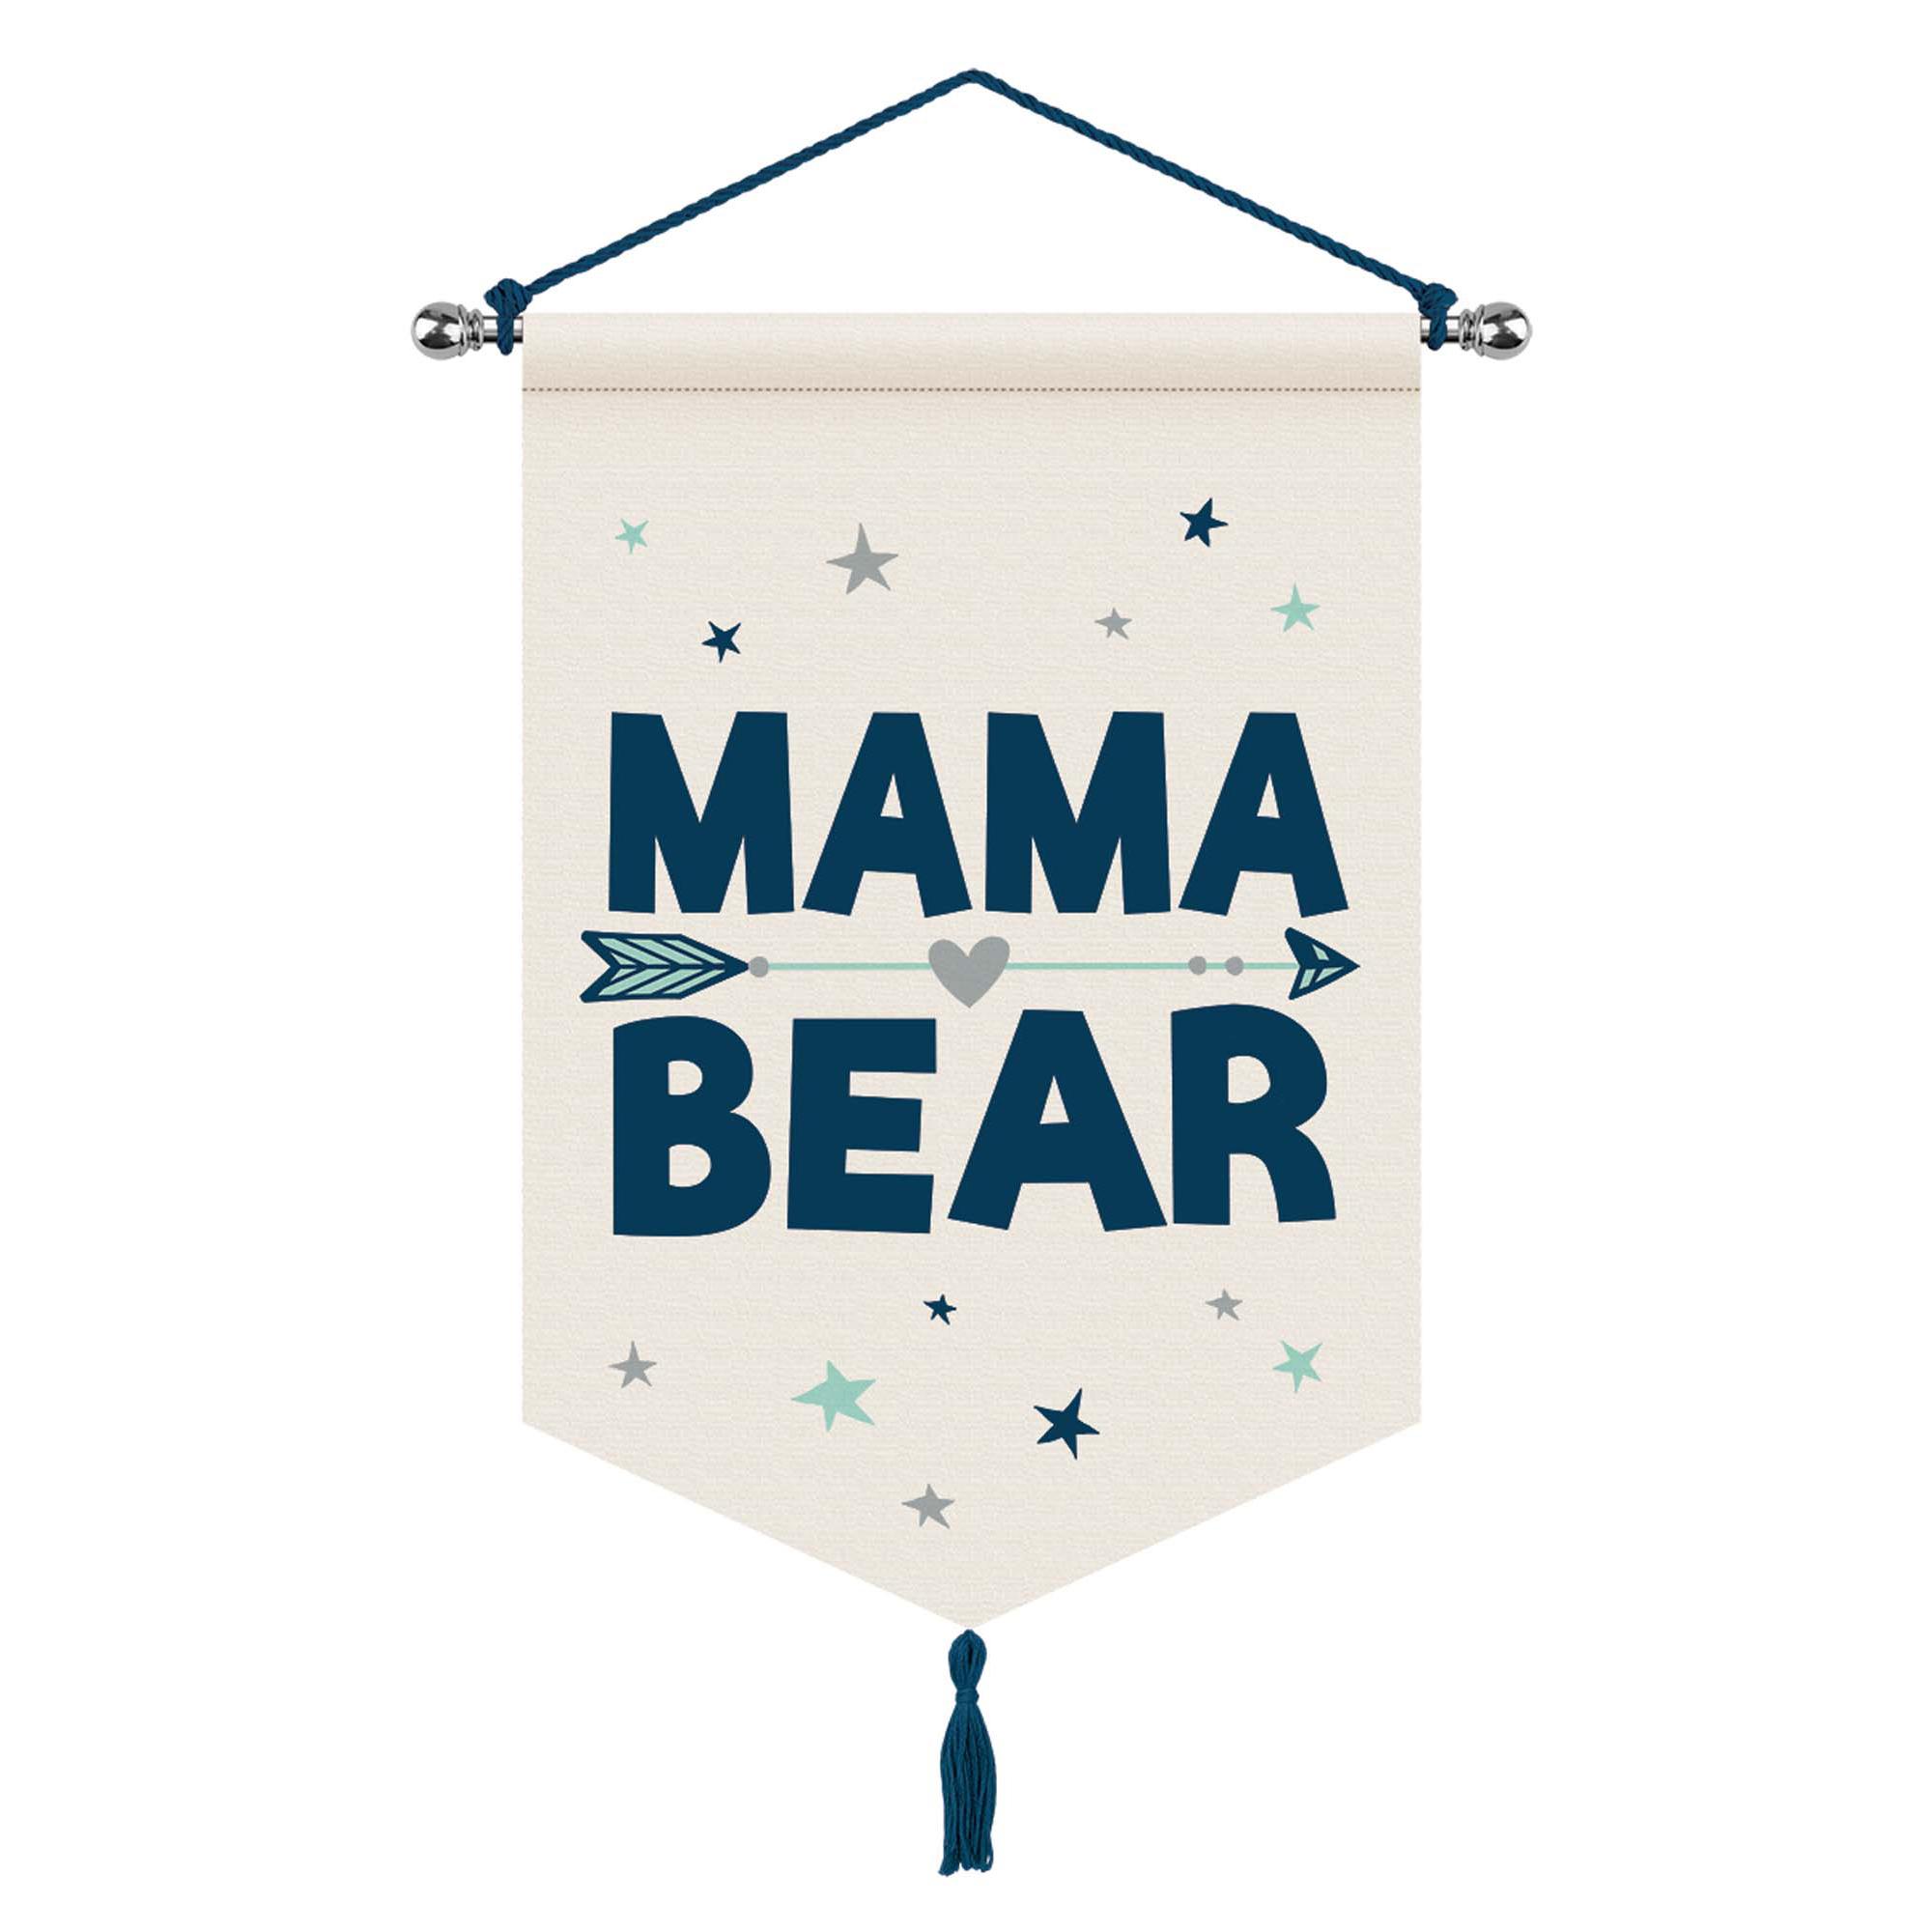 Bearly-ly Wait Canvas Sign Decoration Decorations - Party Centre